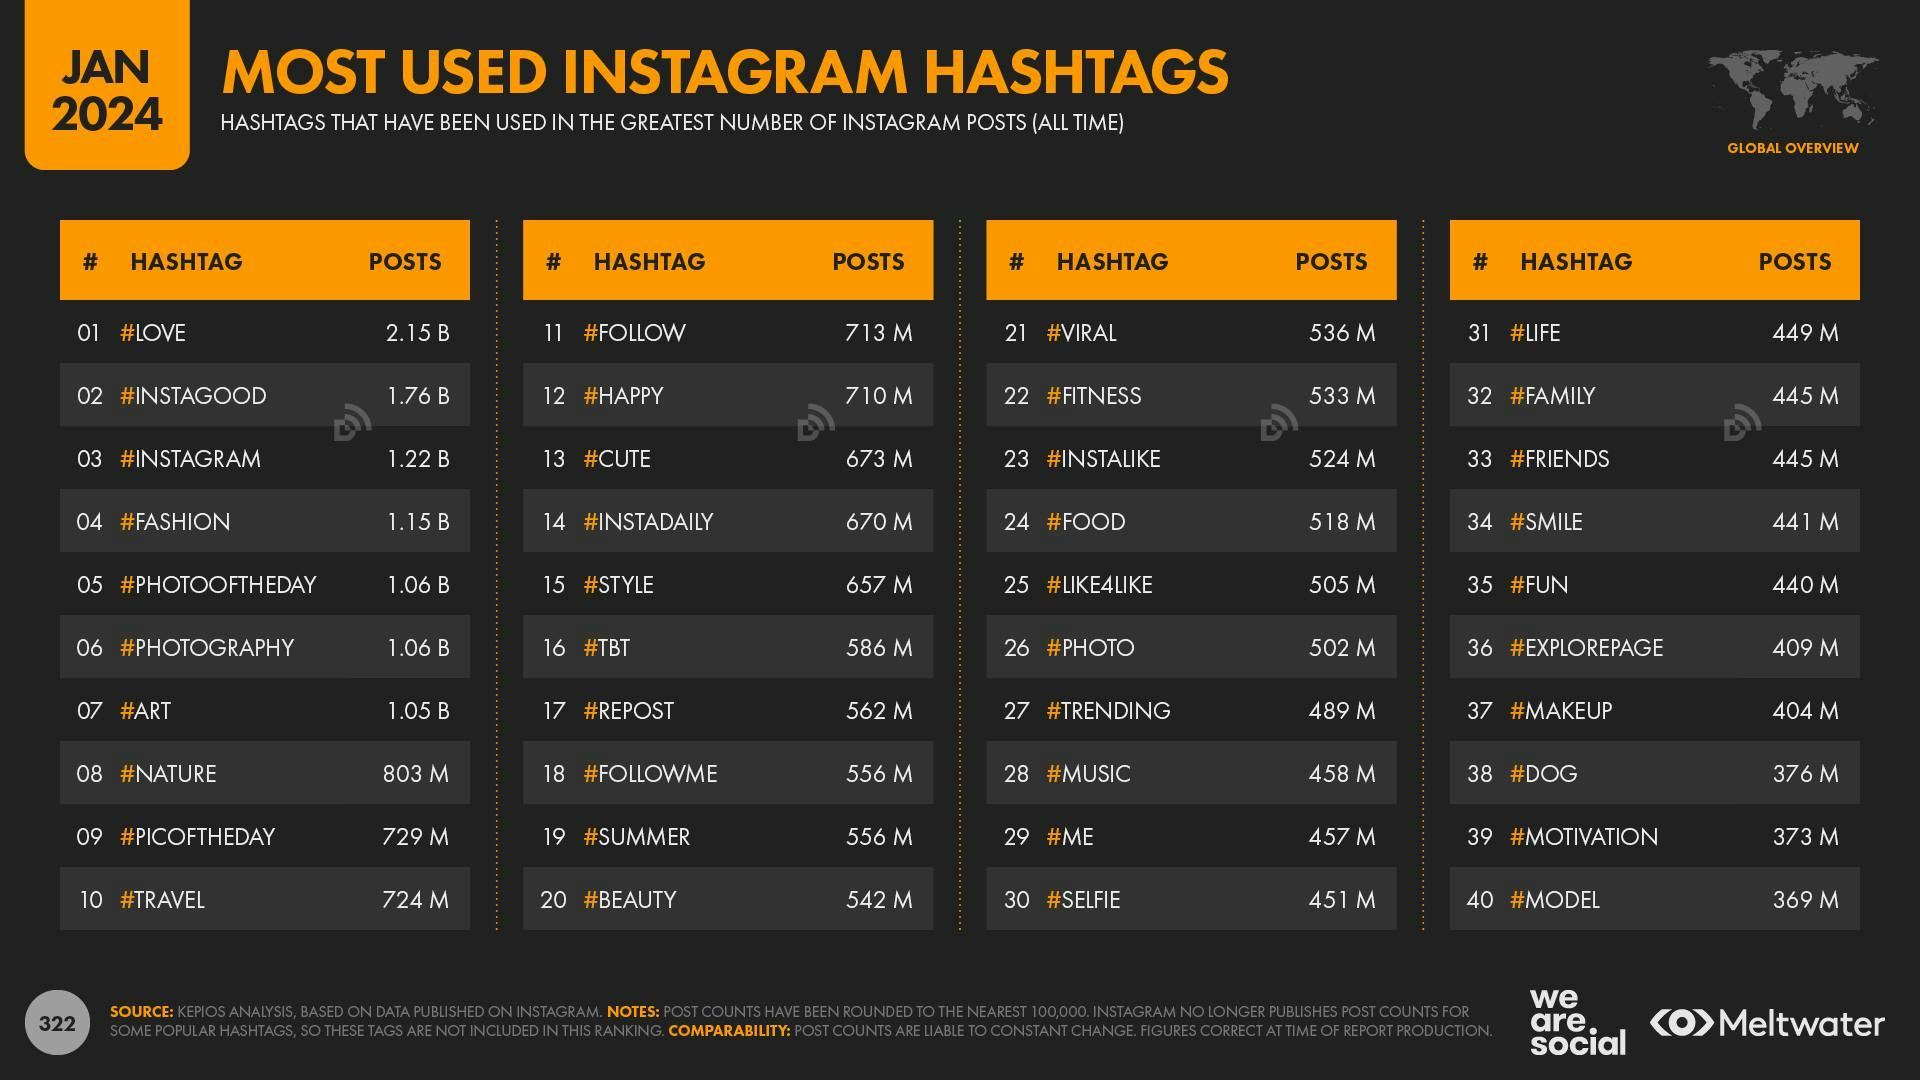 Most used Instagram hashtags